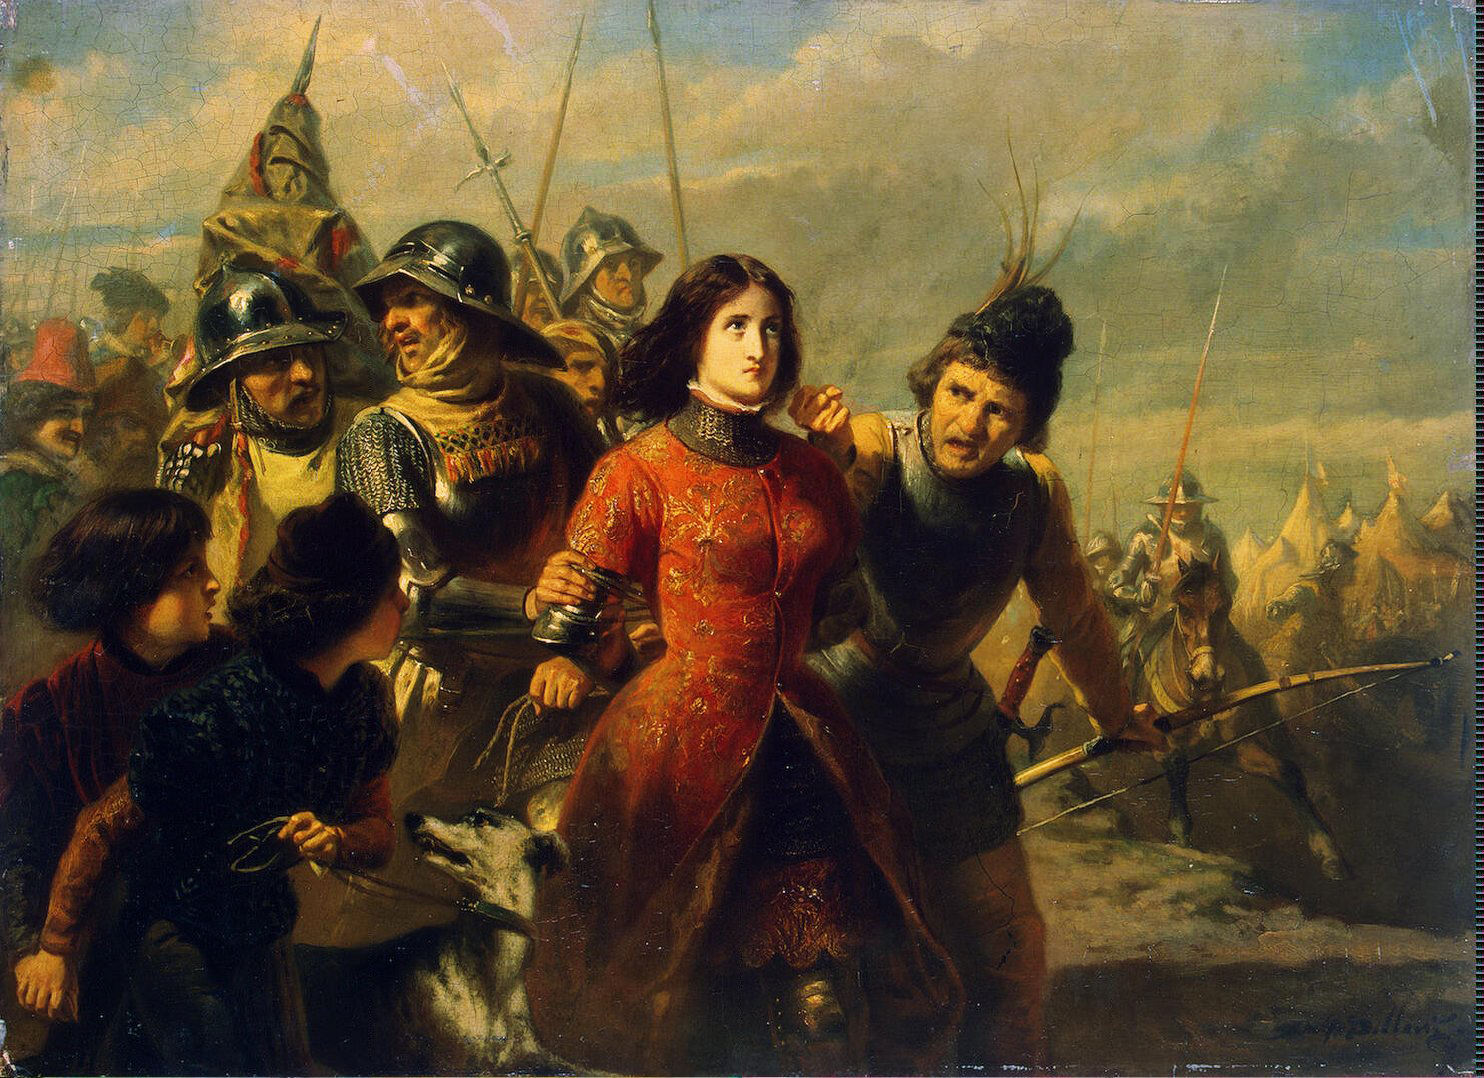 Joan of Arc arrives to relieve the Siege of Orléans on April 29, 1429